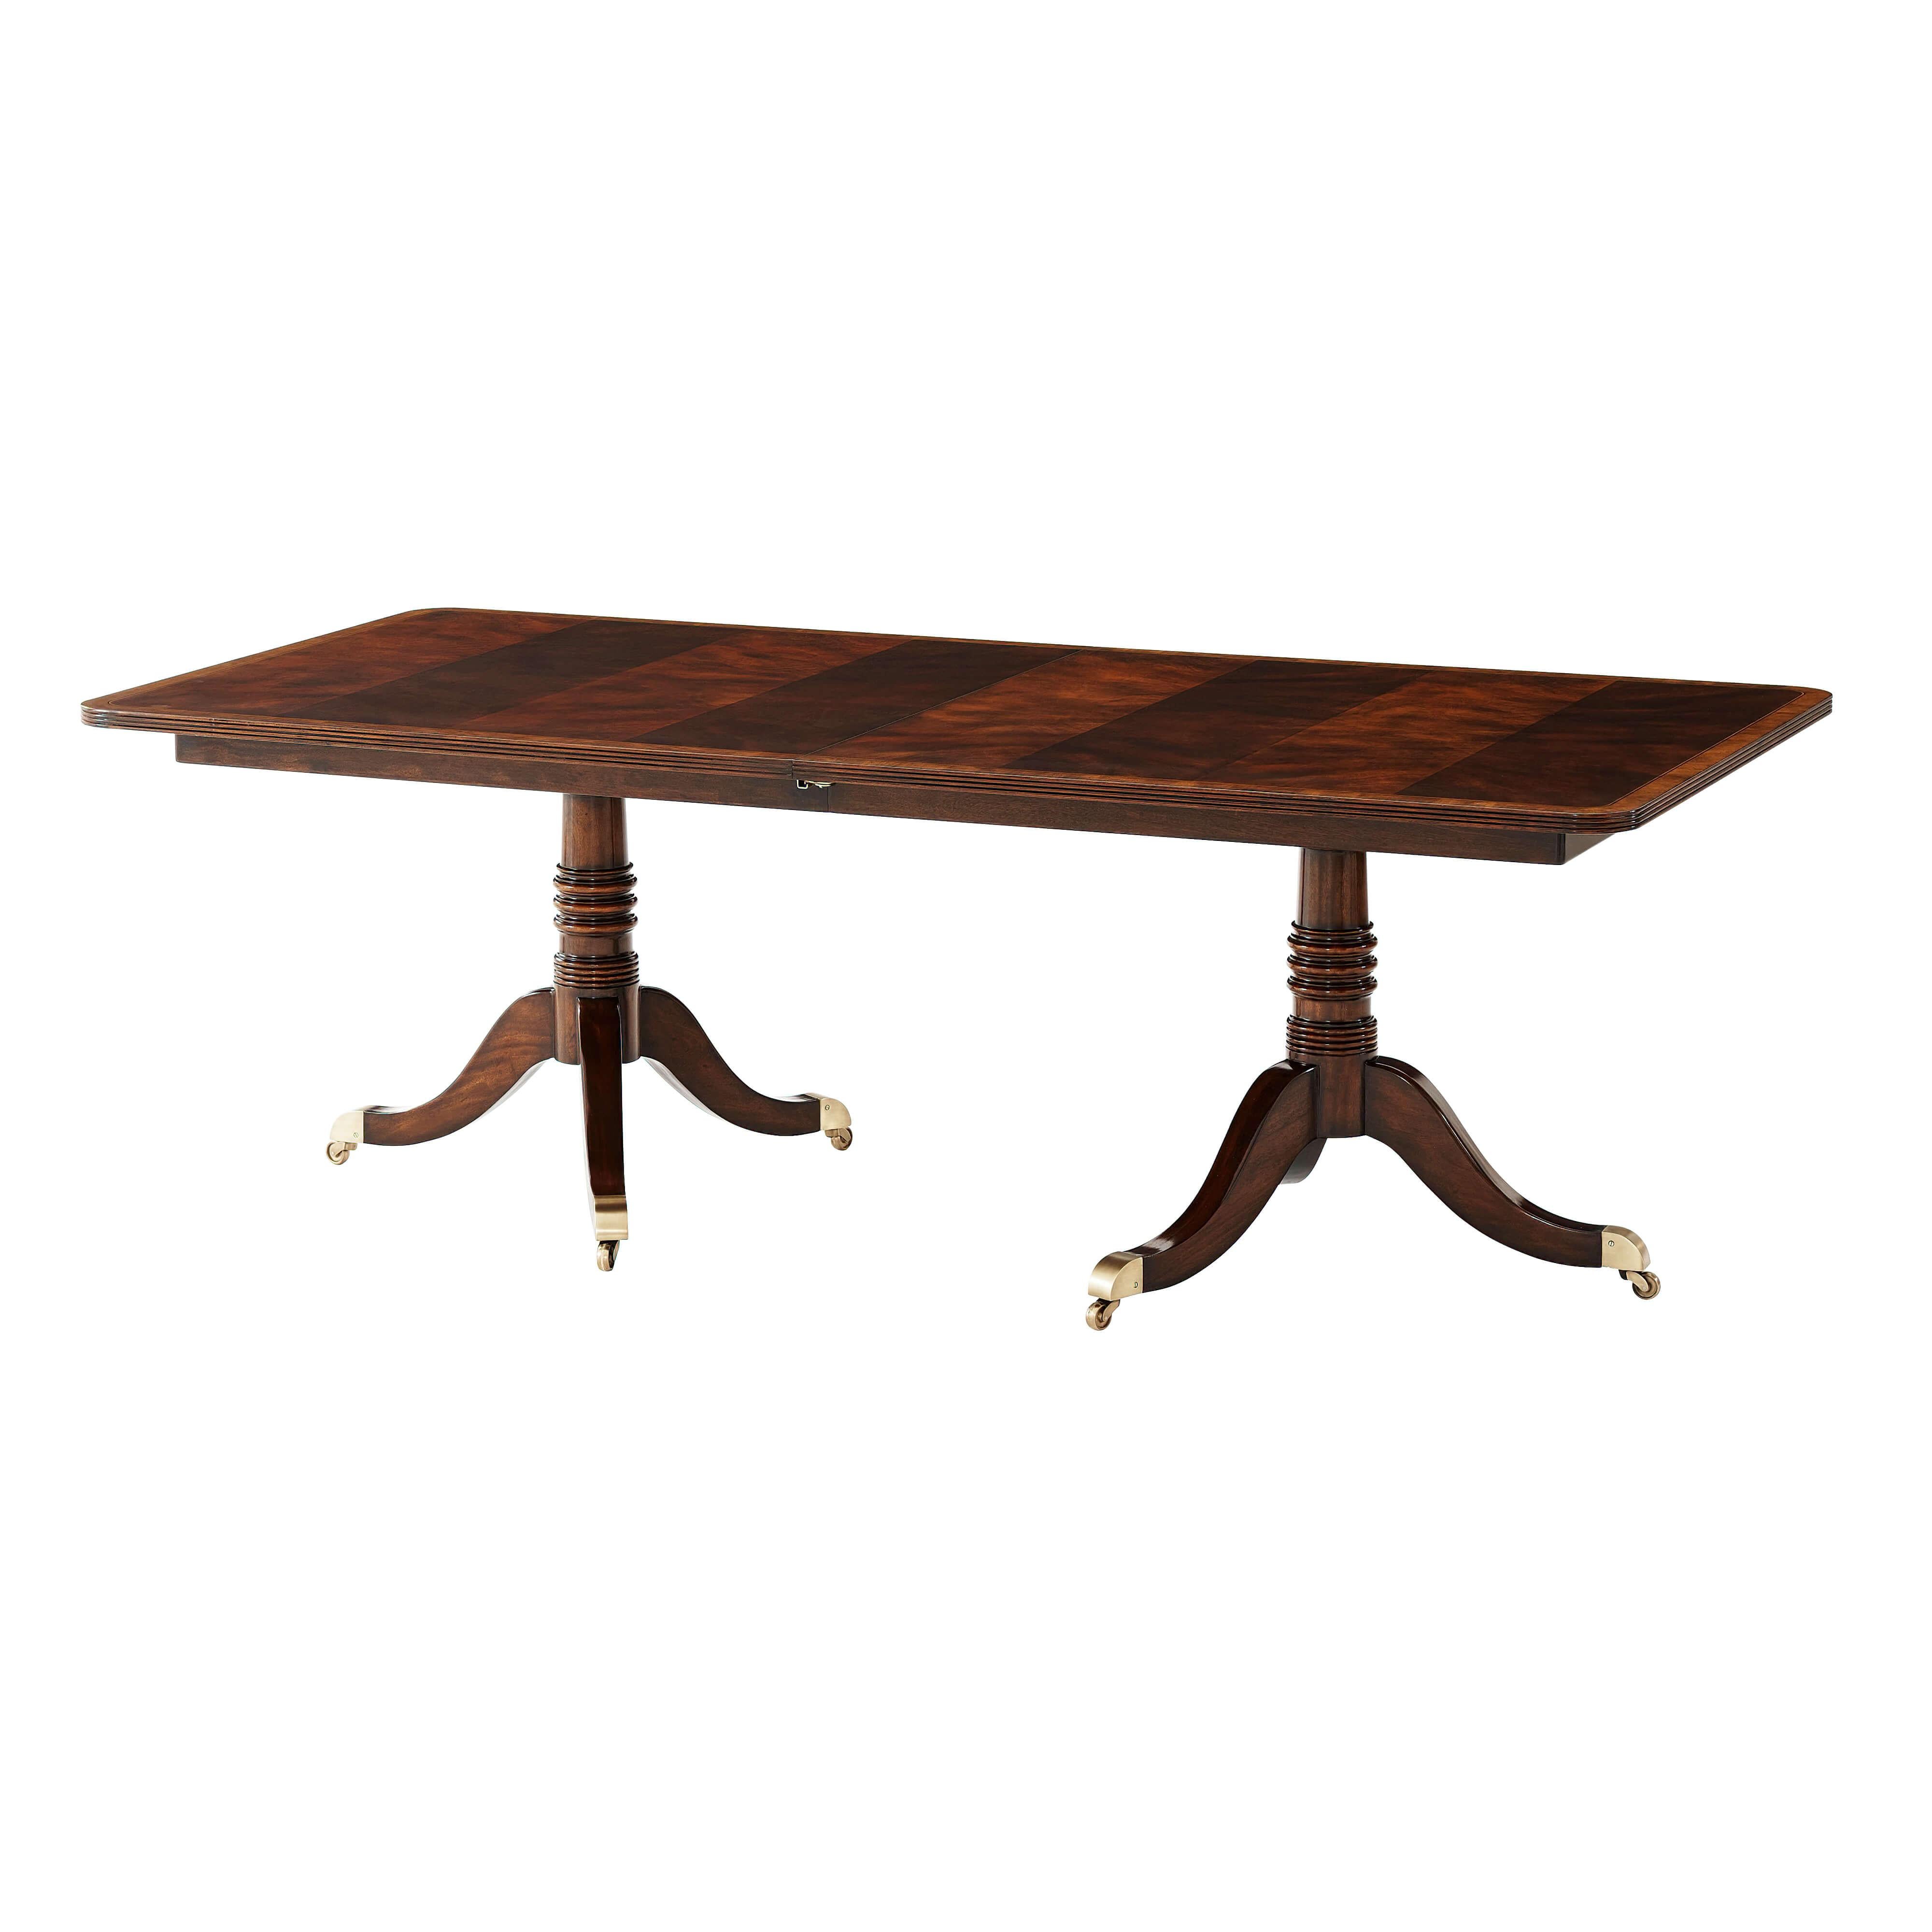 An English Regency style figured mahogany veneered dining table, the rectangular reeded edge and satinwood banded top extending to accommodate one additional leaf, on two gun-barrel turned column pedestals with down swept legs terminating in brass